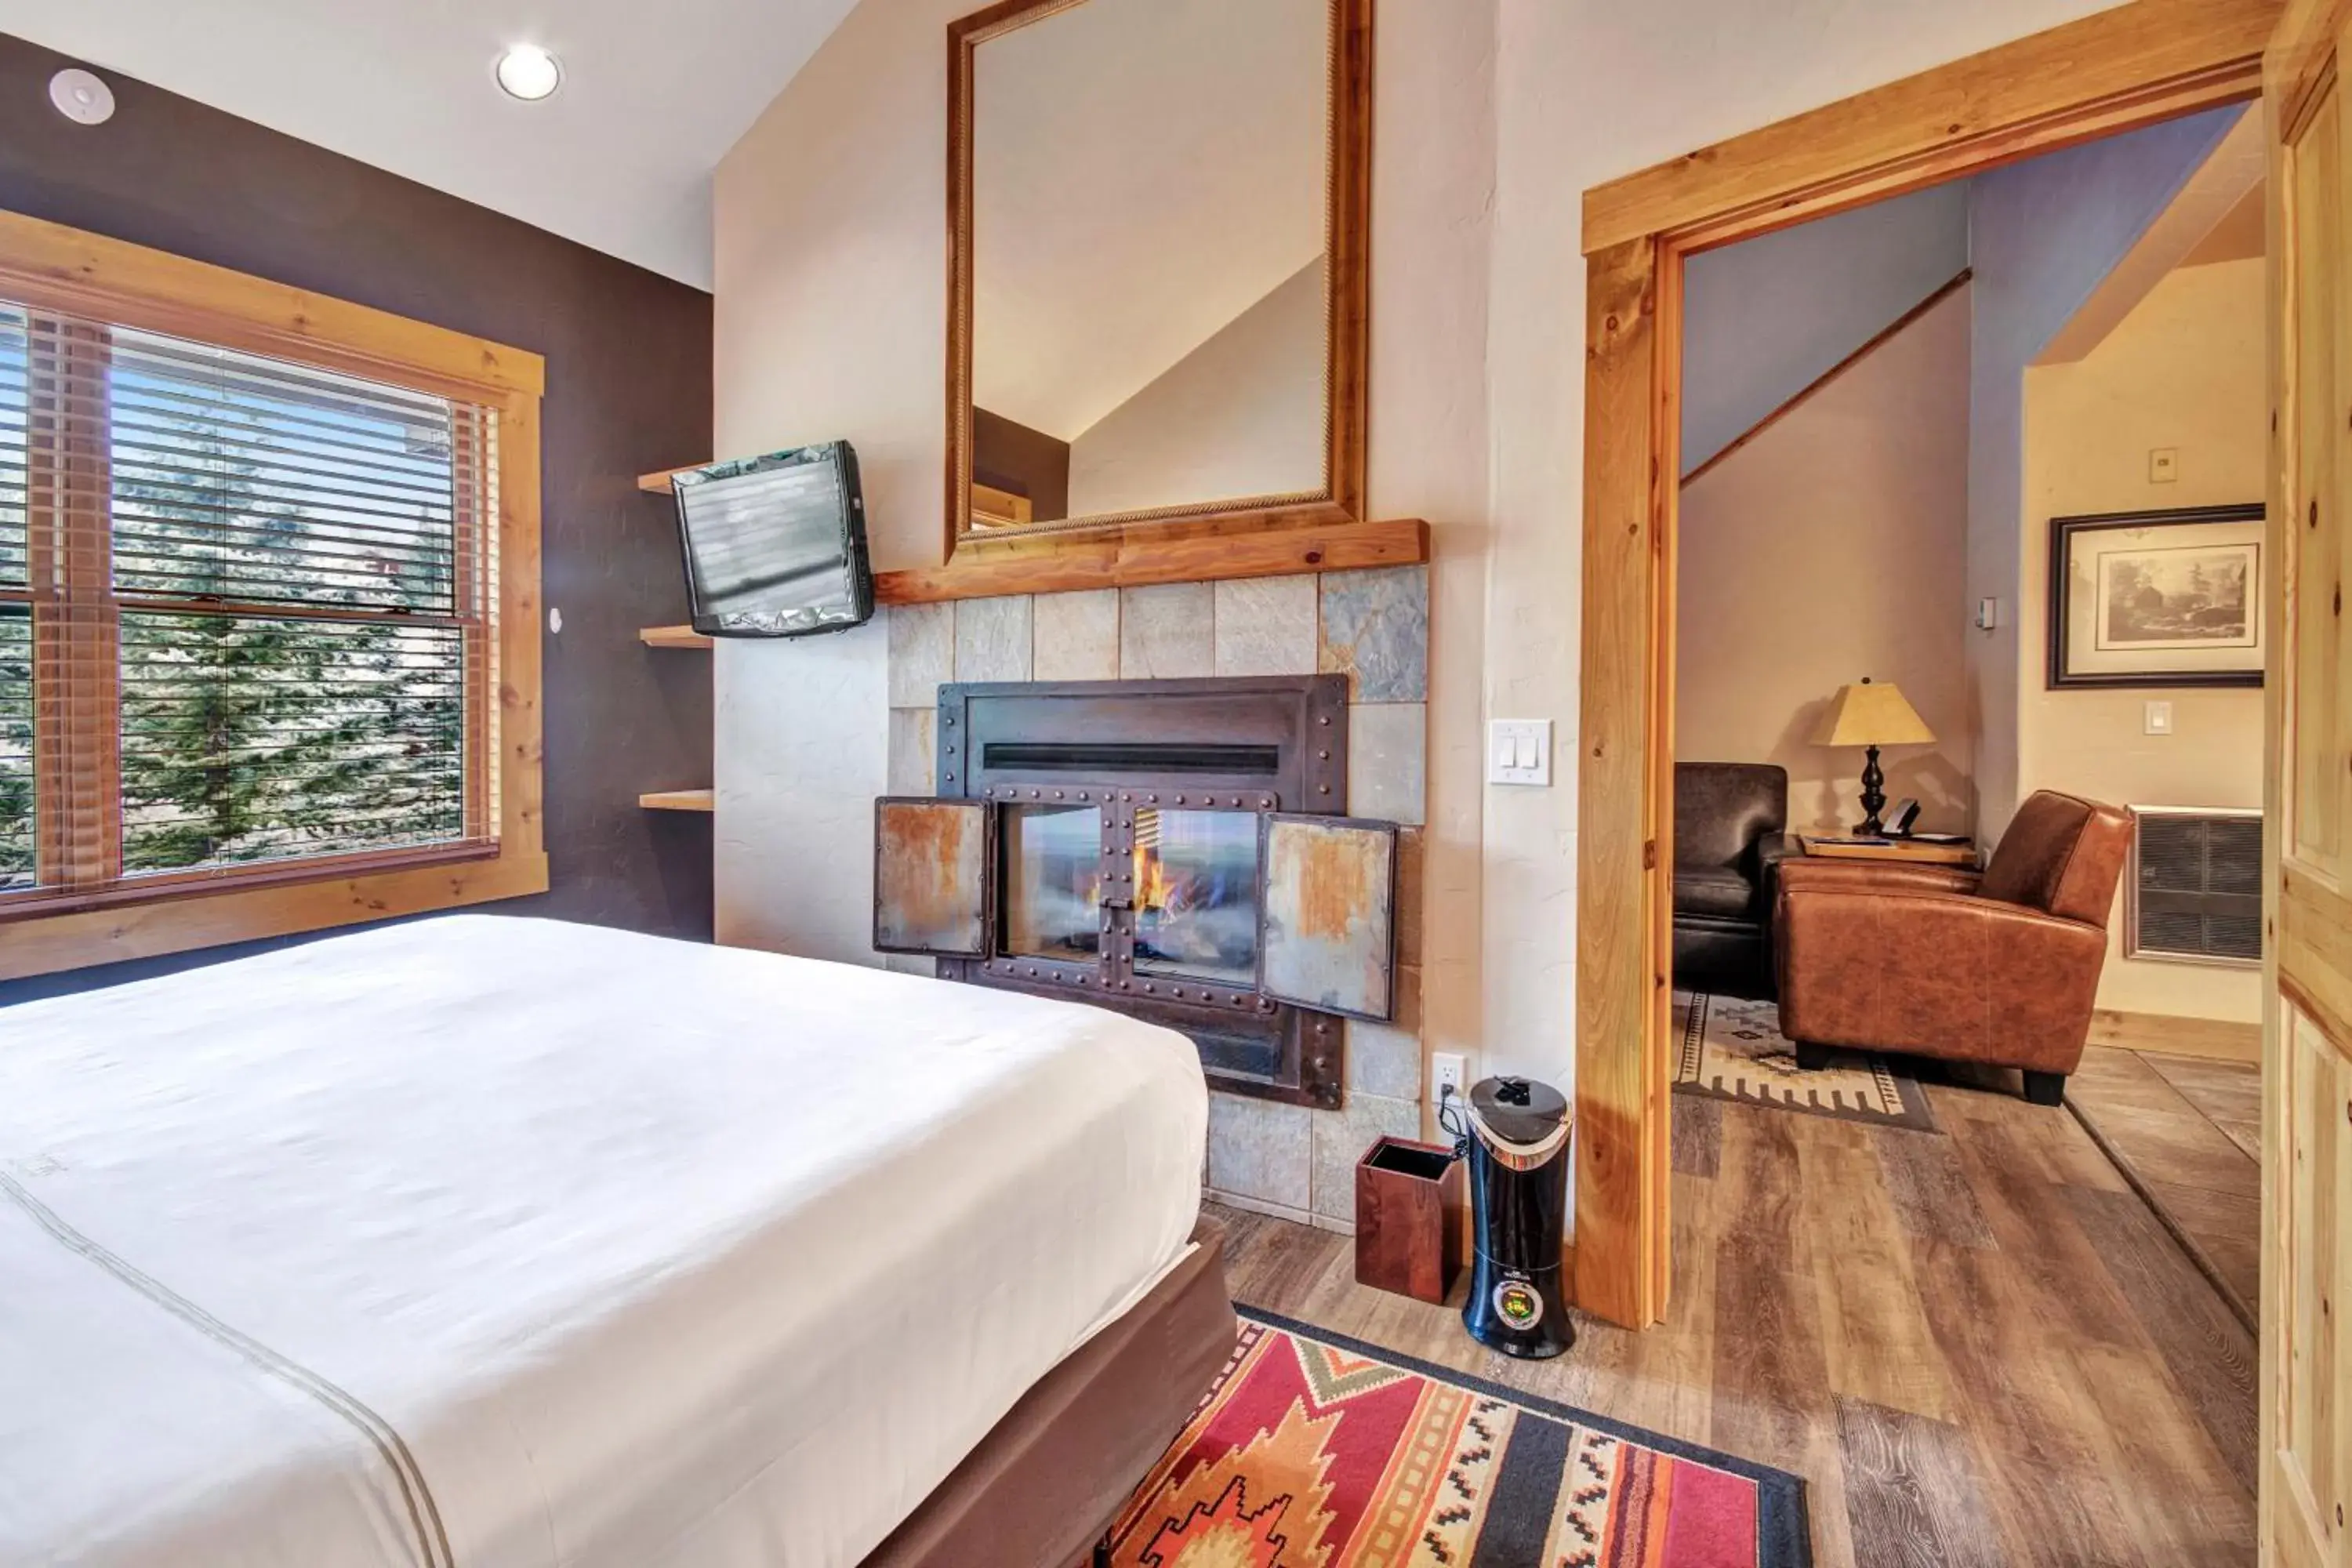 Bedroom in Mountain Lodge at Telluride